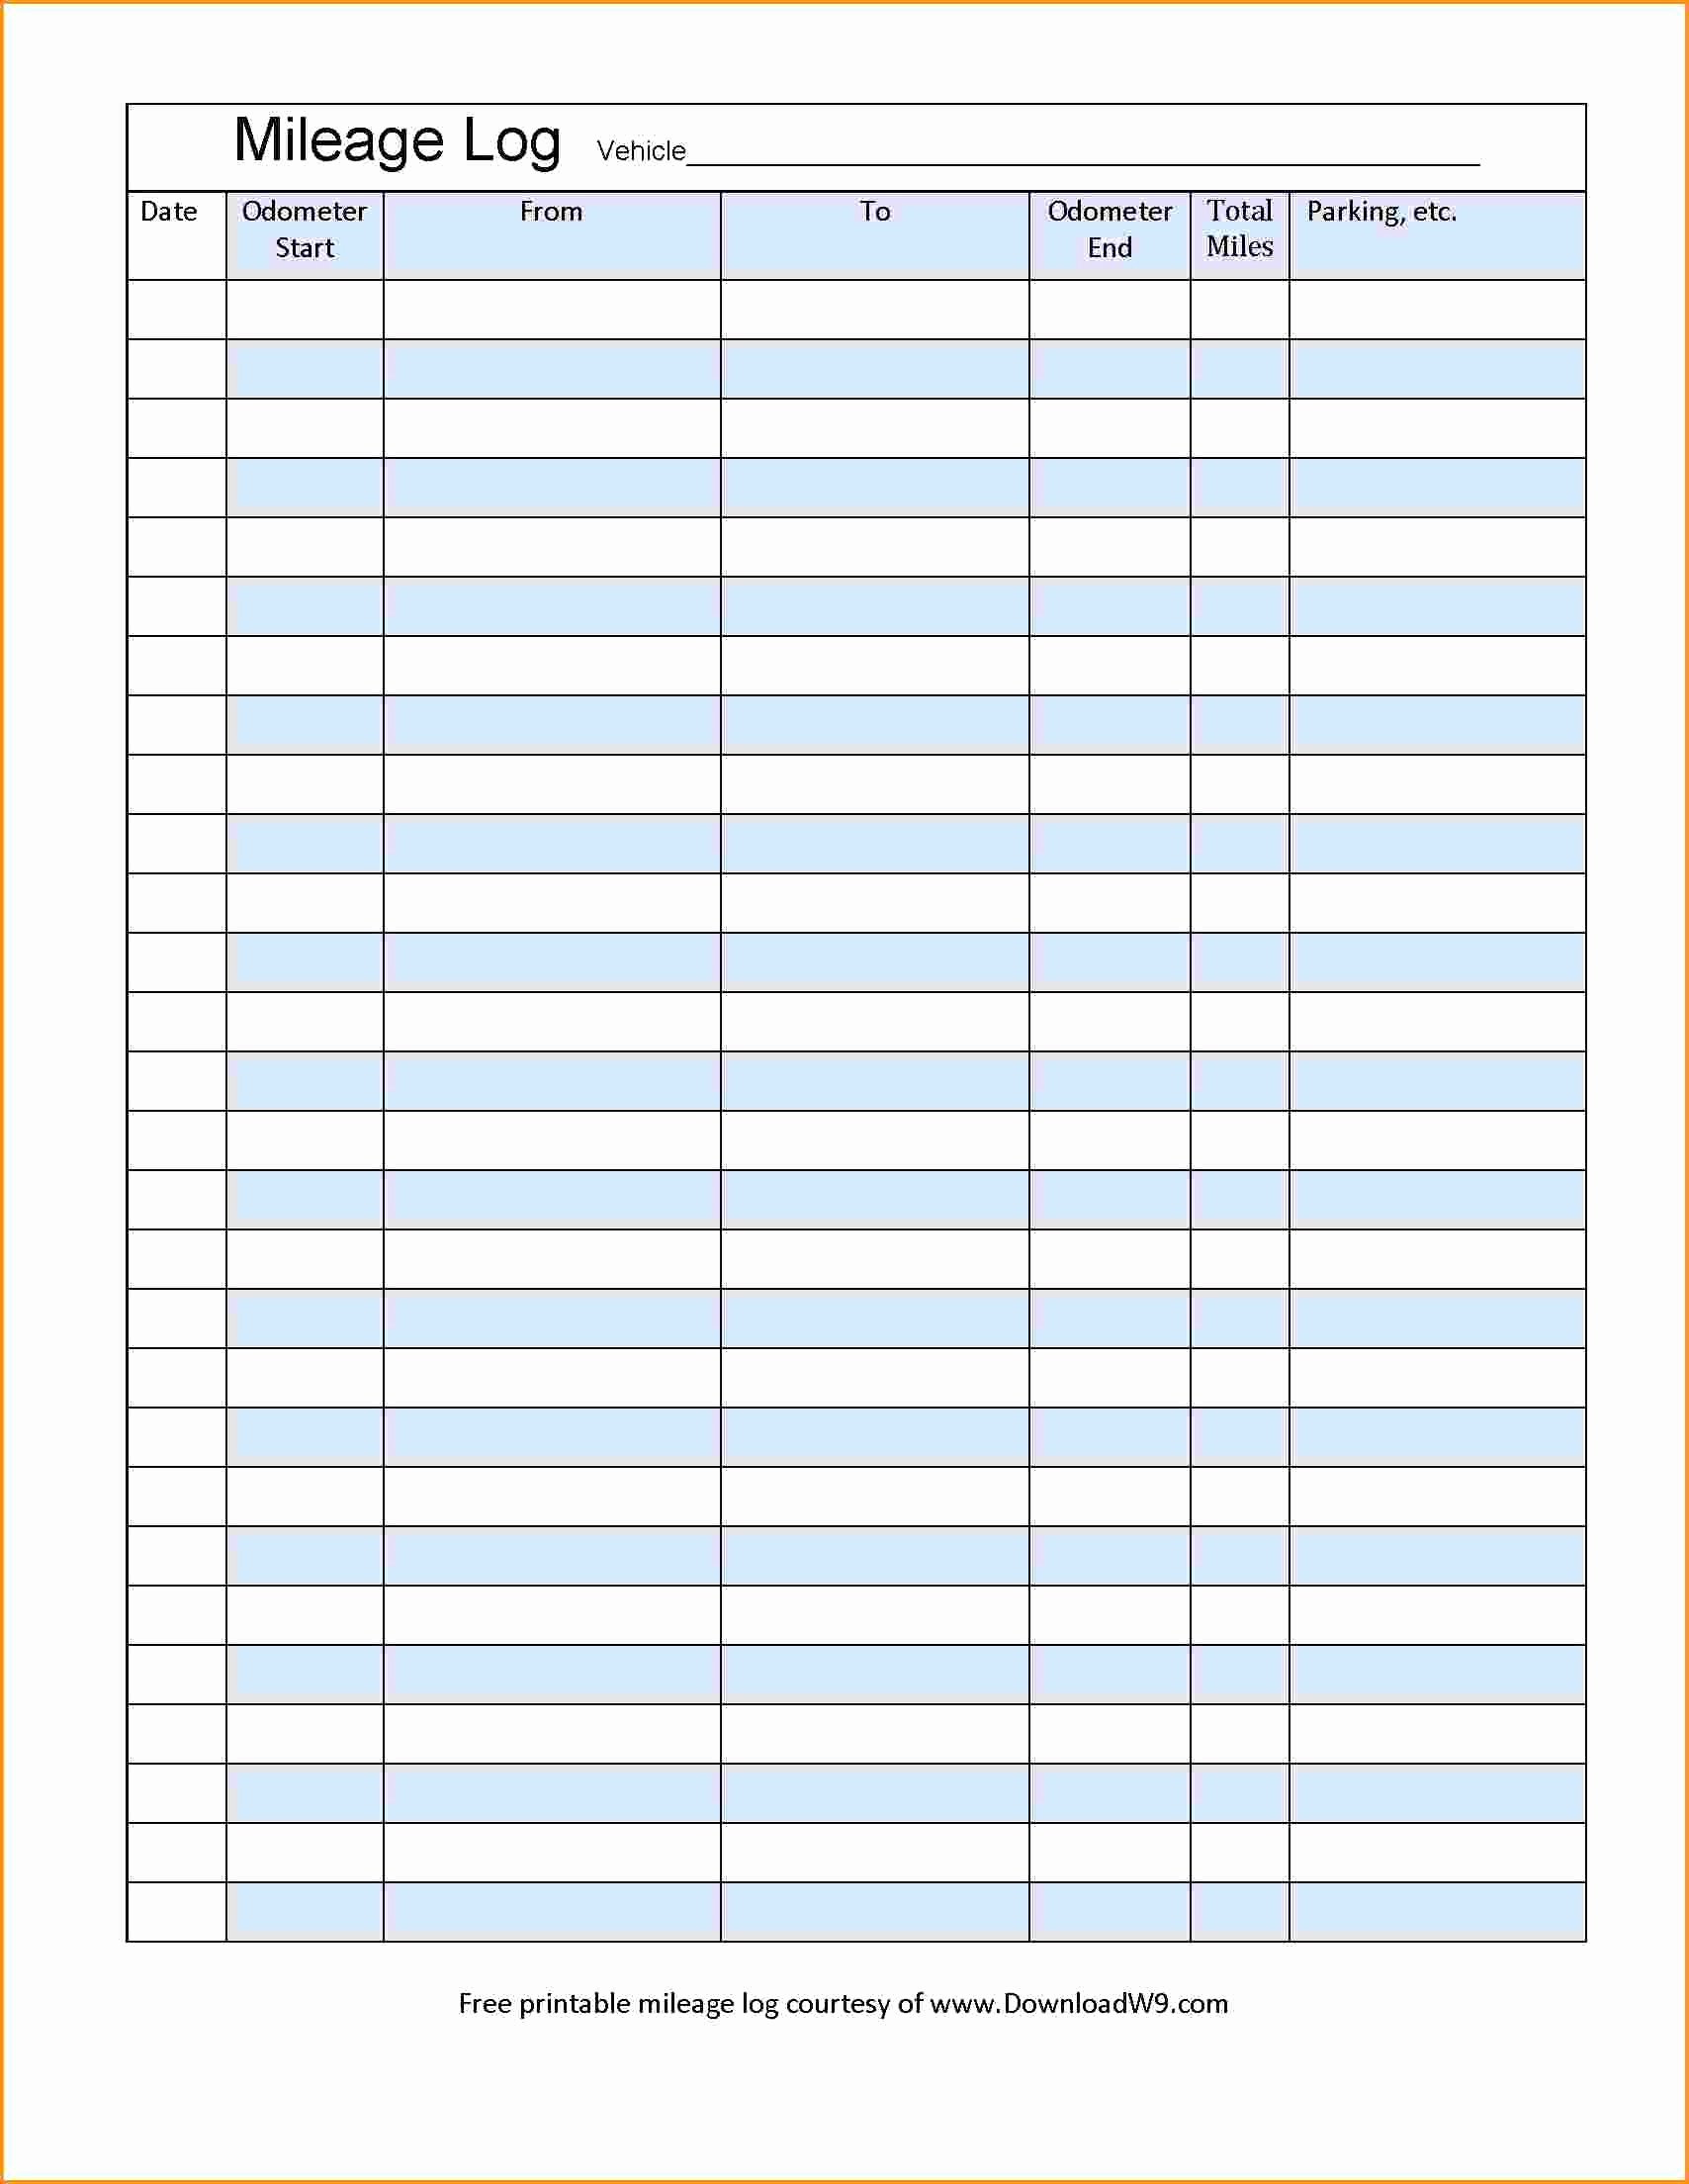 Mileage Log Template for Taxes Awesome Free Mileage Spreadsheet for Taxes Samplebusinessresume